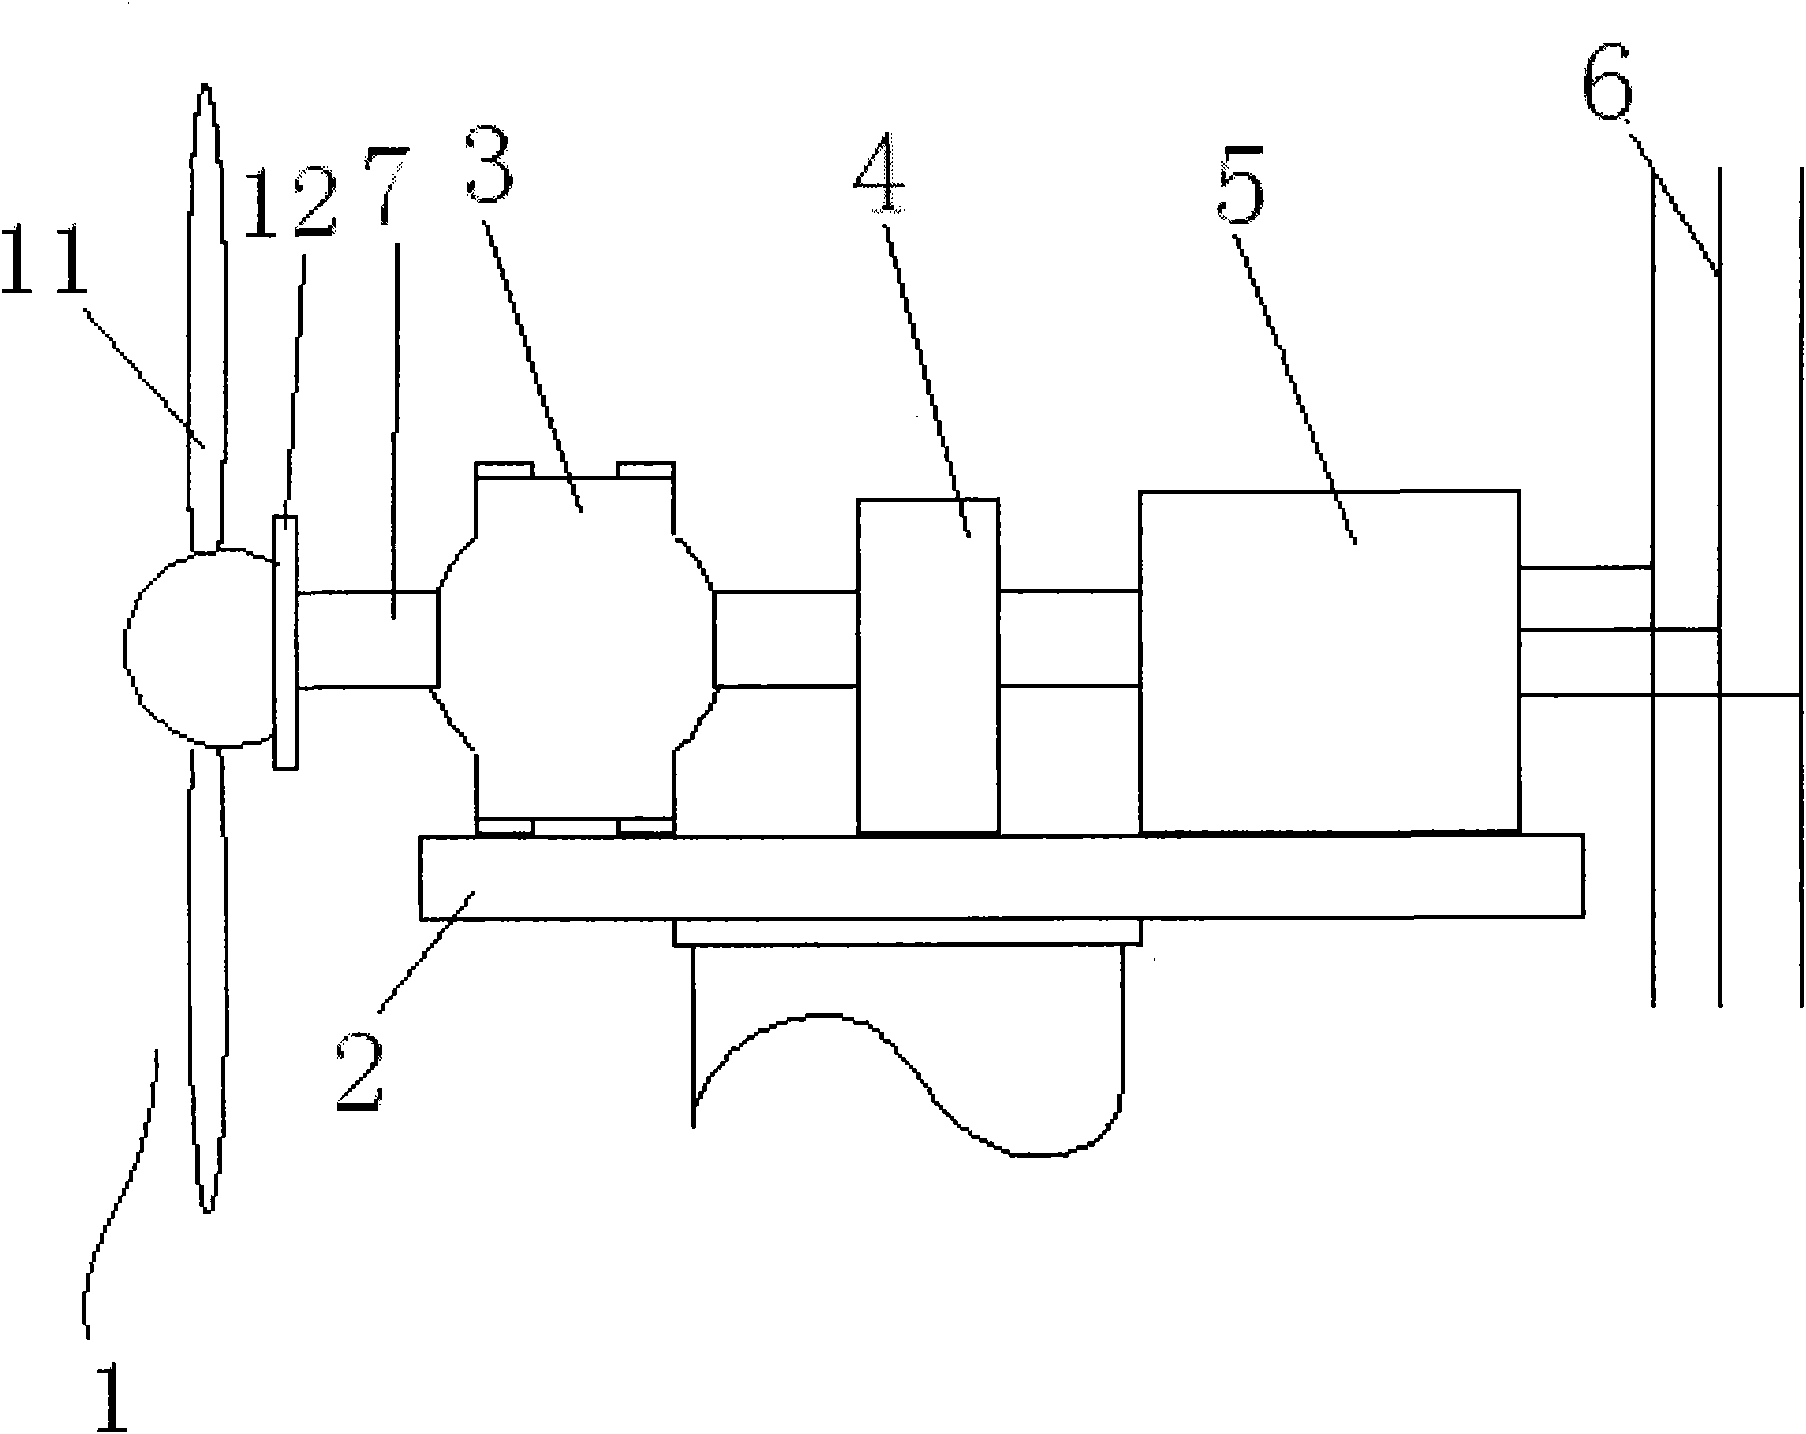 Direct-current excitation synchronous wind generating set